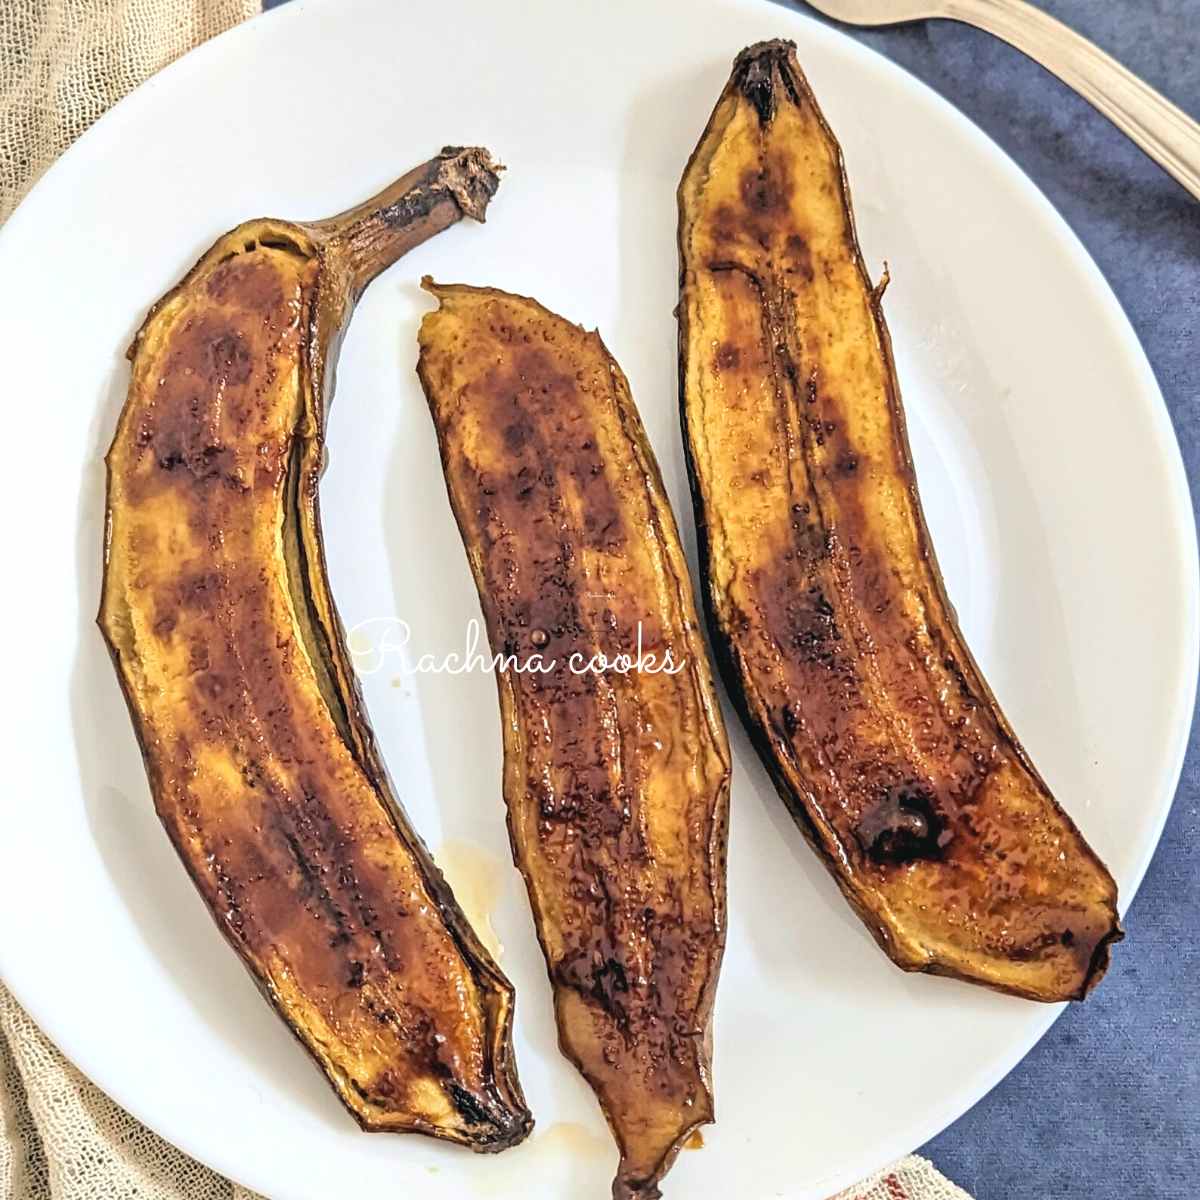 3 air fried banana halves served on a white plate.